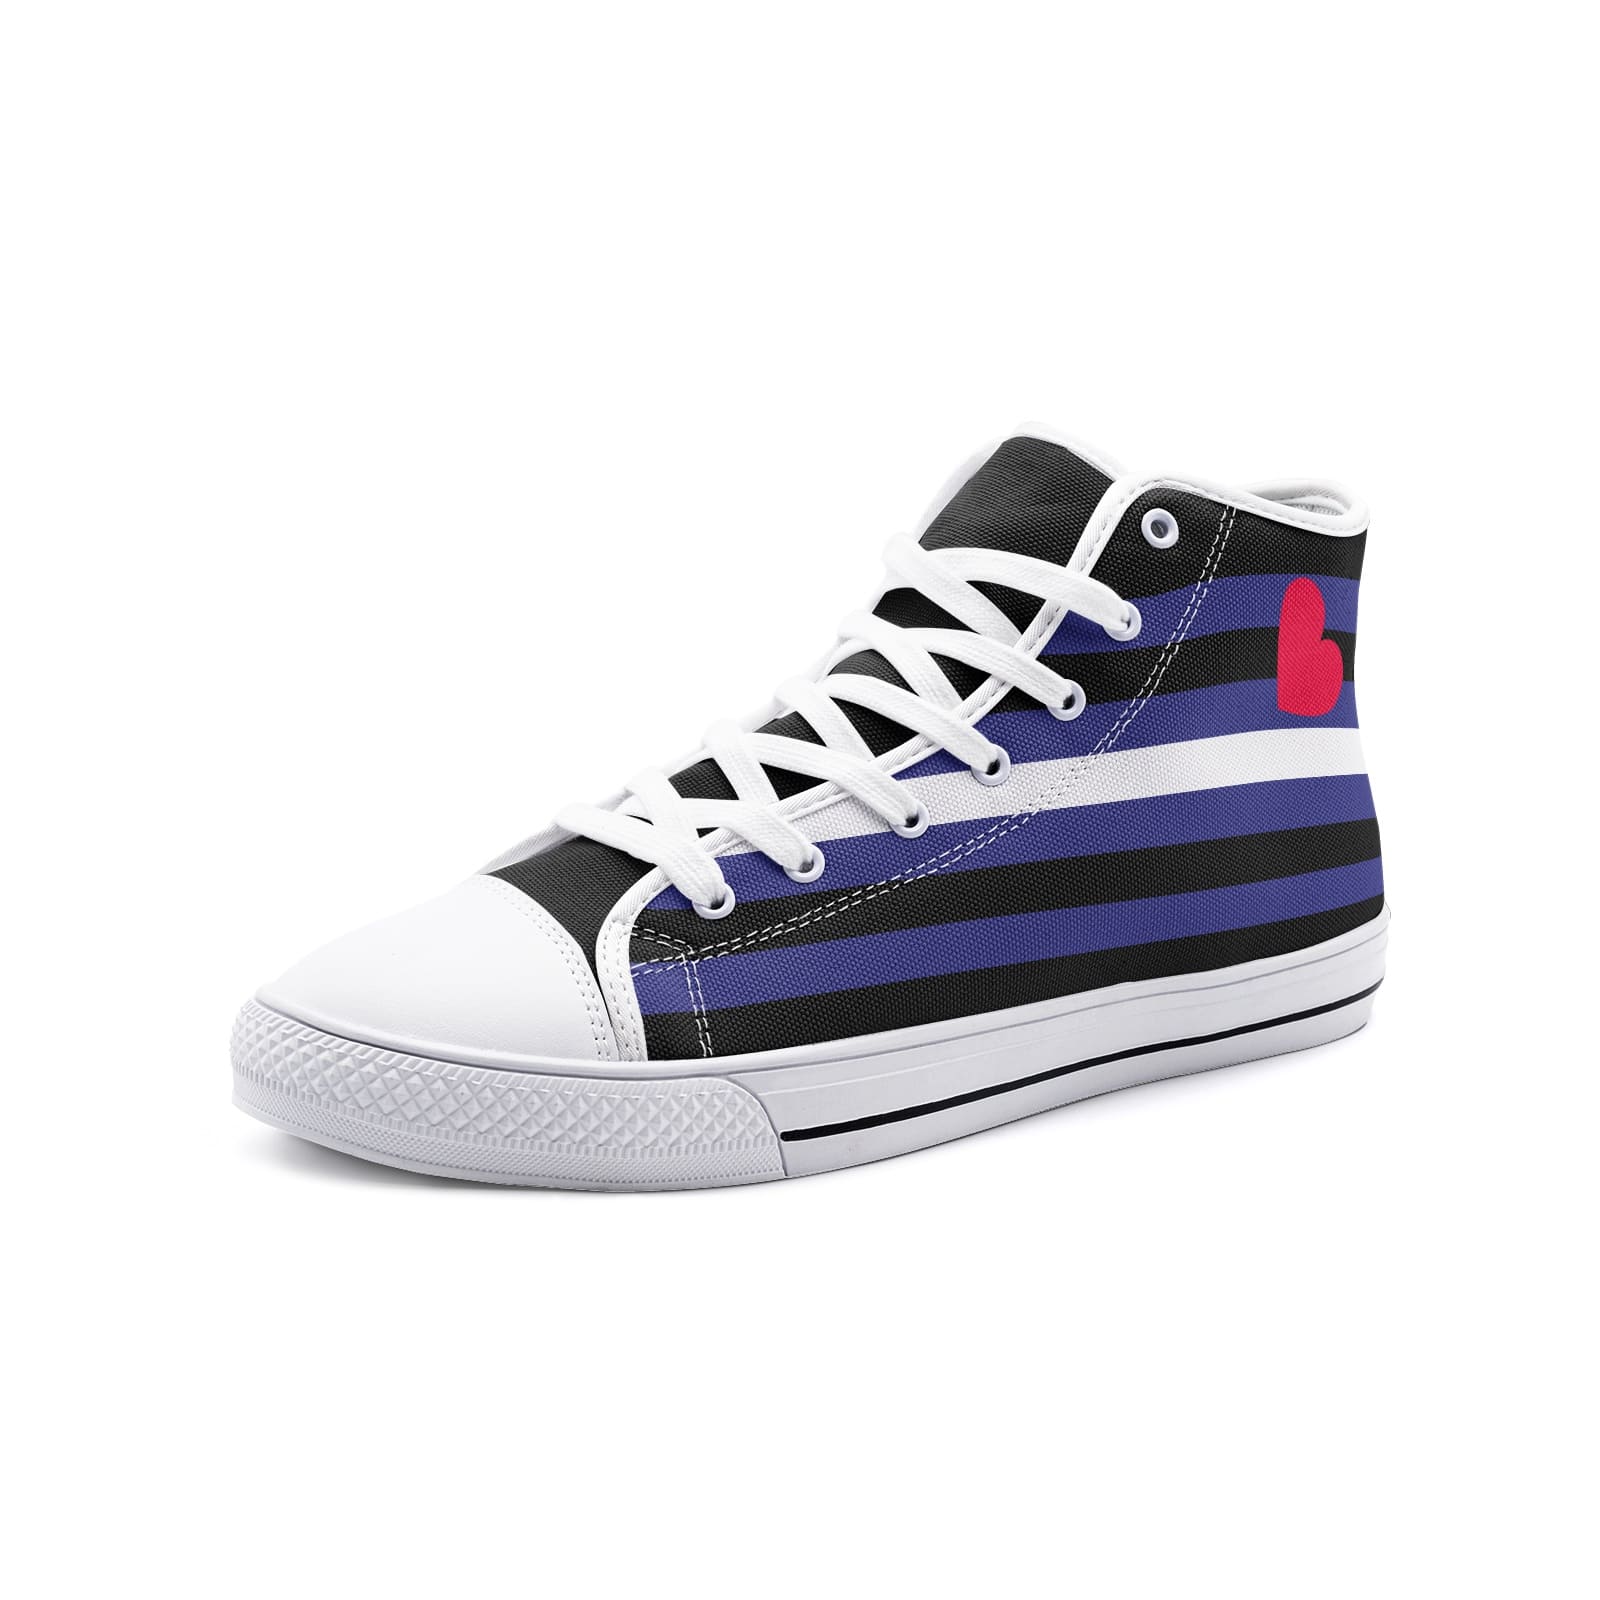 leather pride shoes, sneakers, white